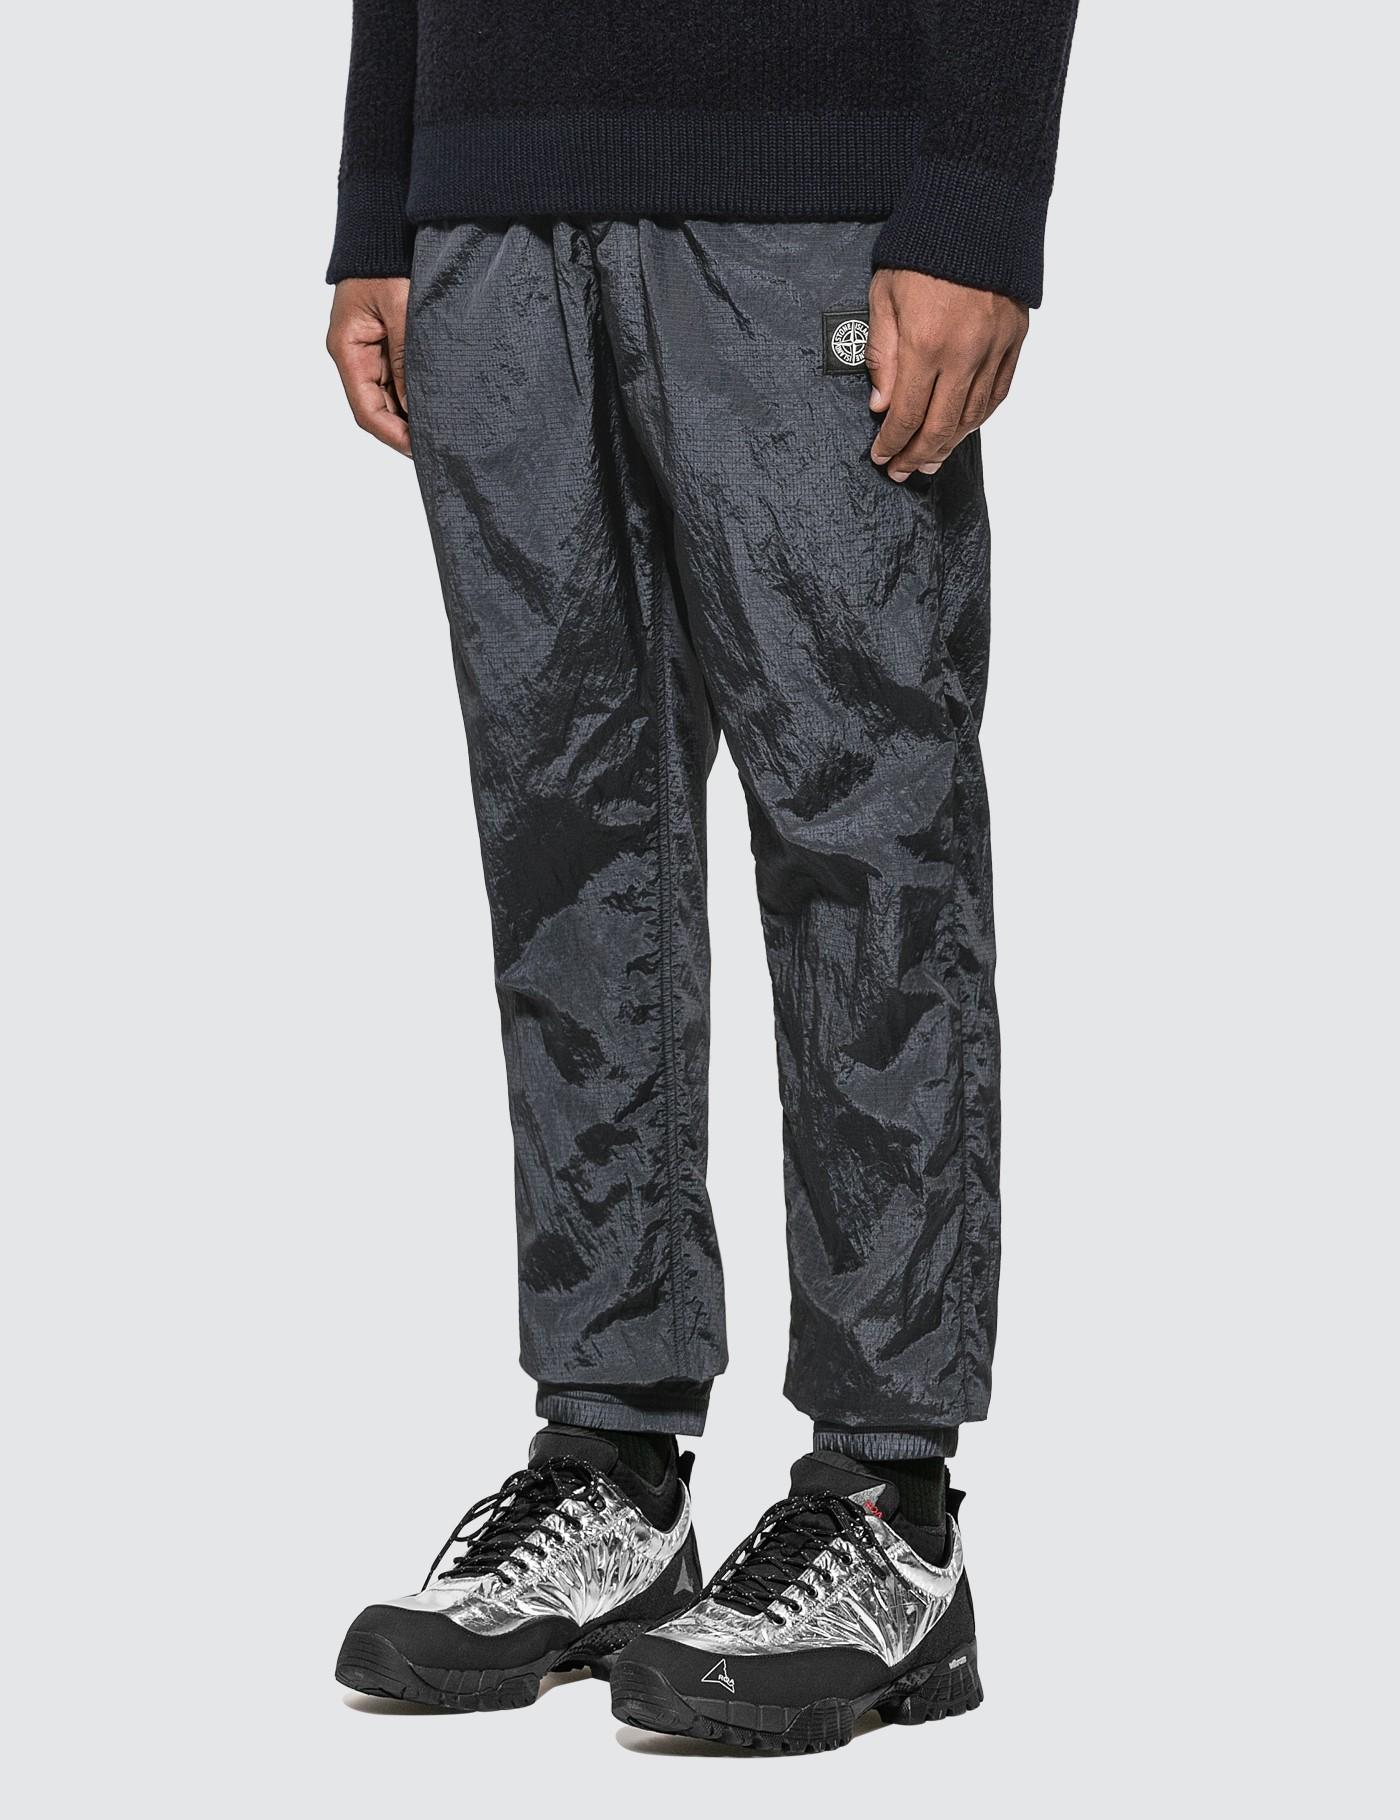 Stone Island Synthetic Patch Nylon Pants in Blue for Men - Lyst